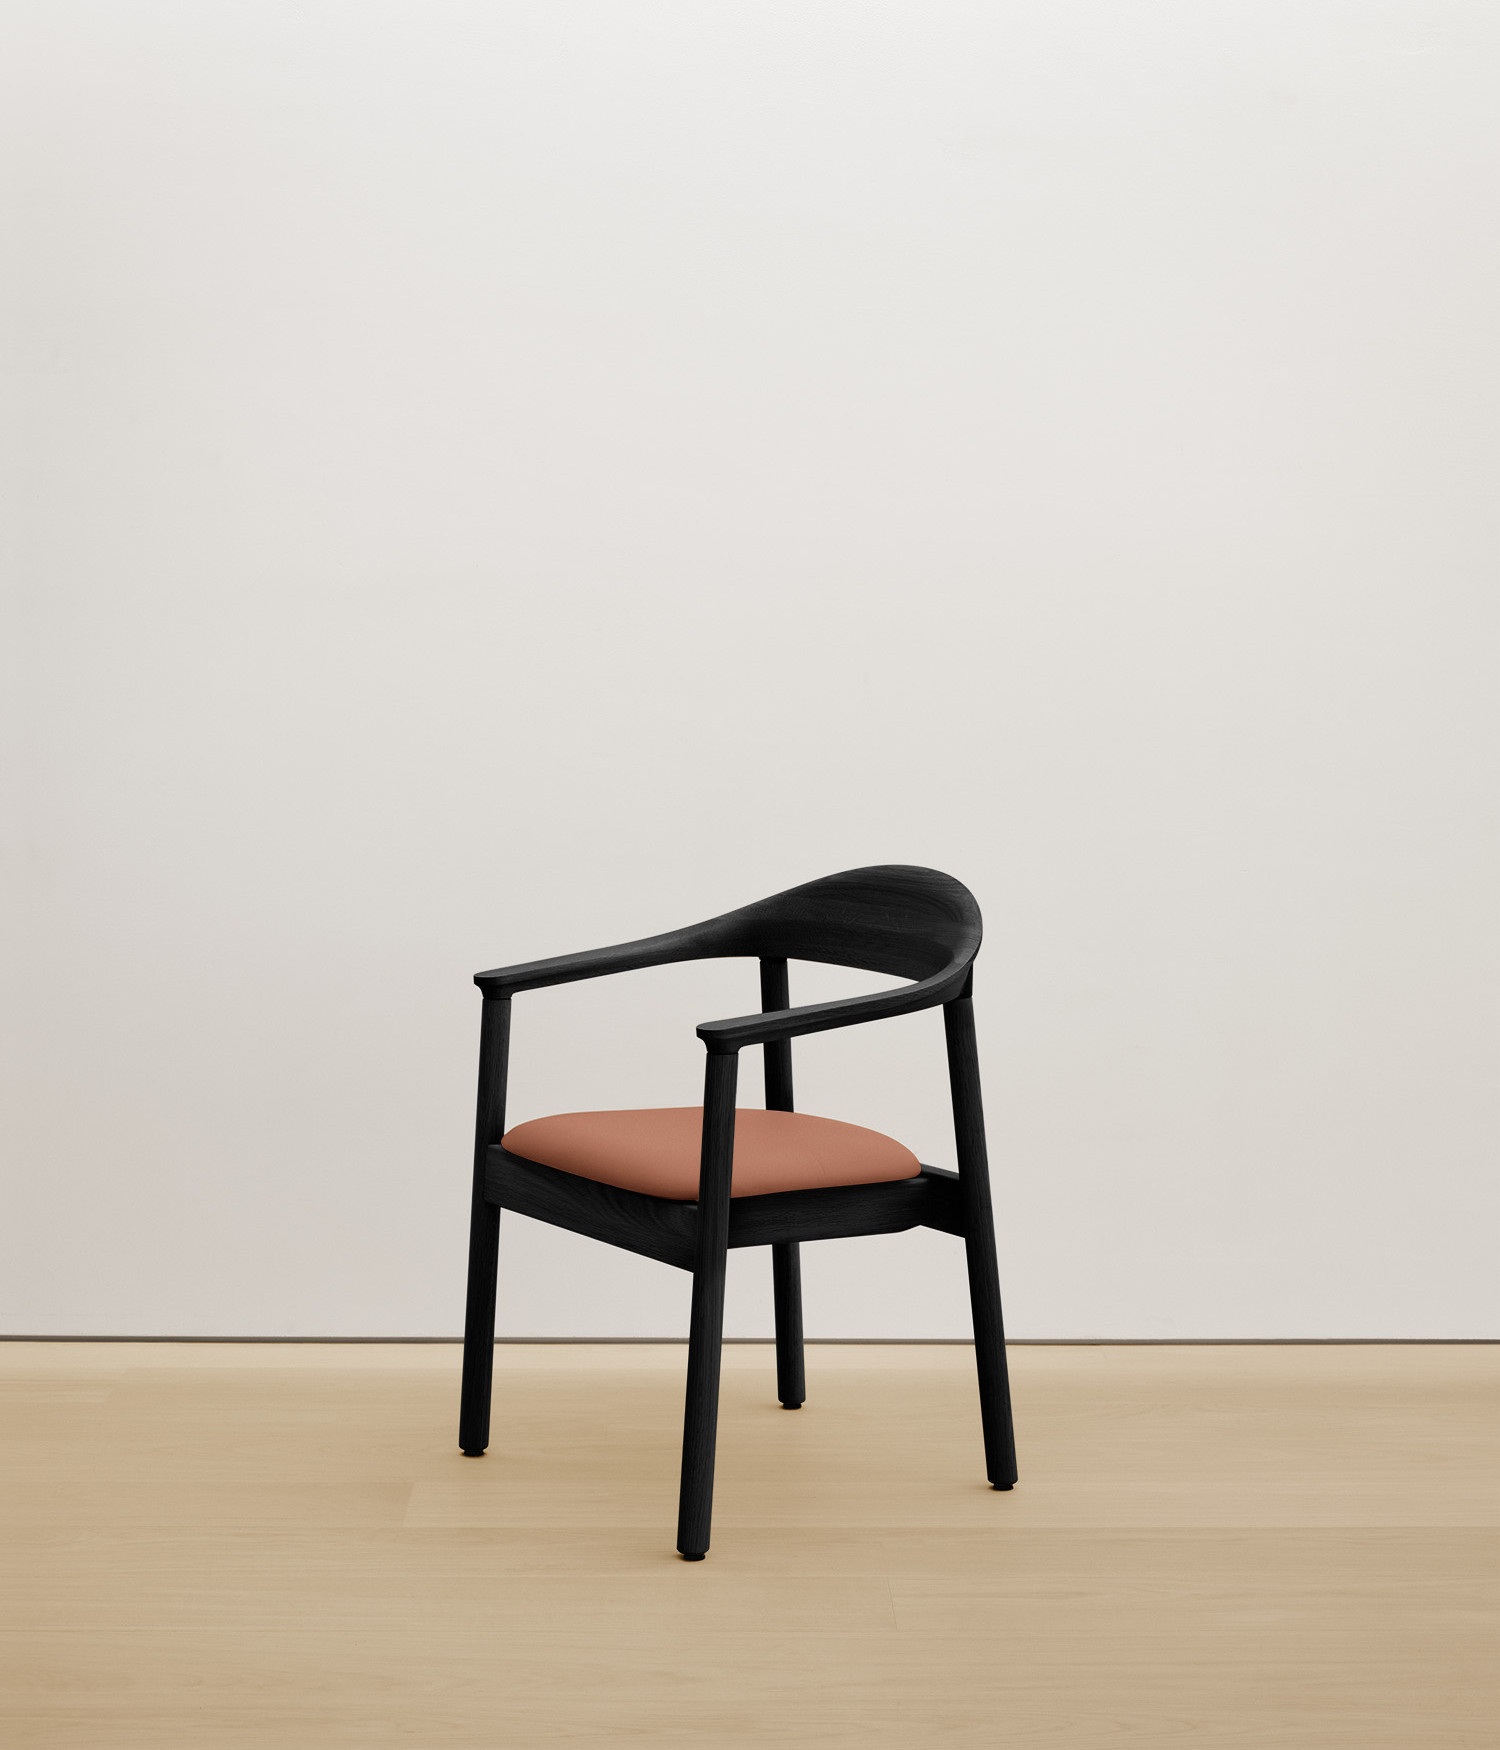  black-stained-oak chair with  color upholstered seat